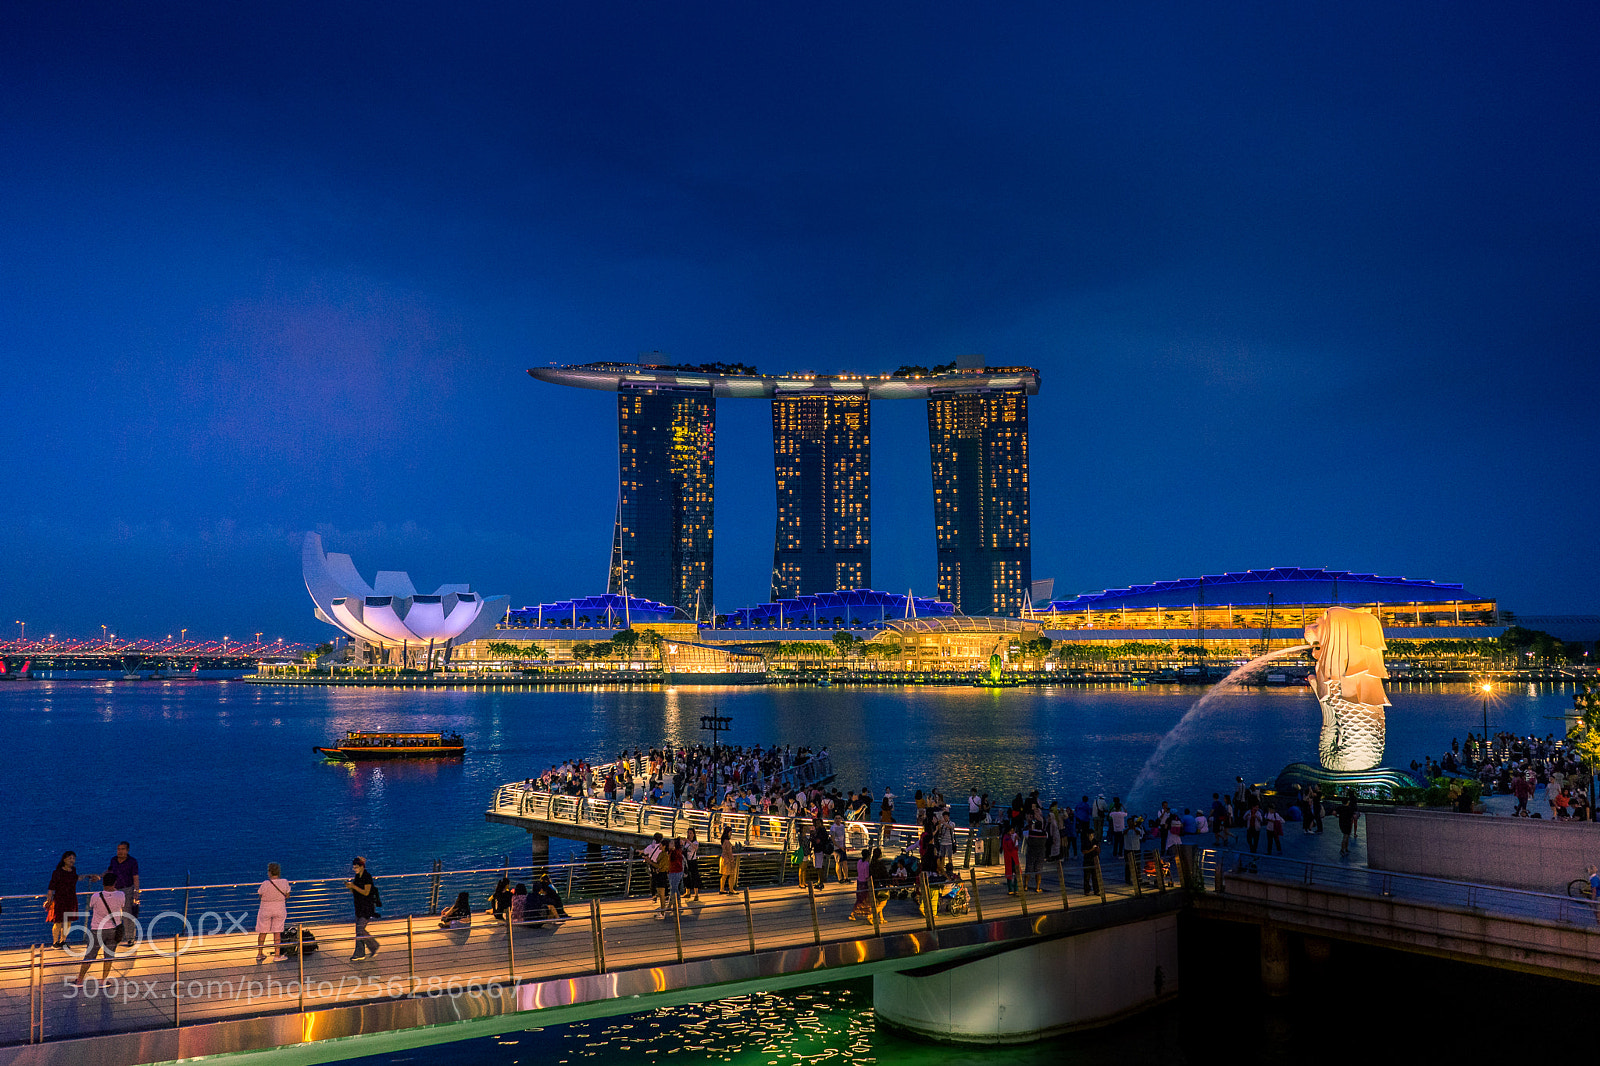 Sony a7 II sample photo. Singapore by night photography